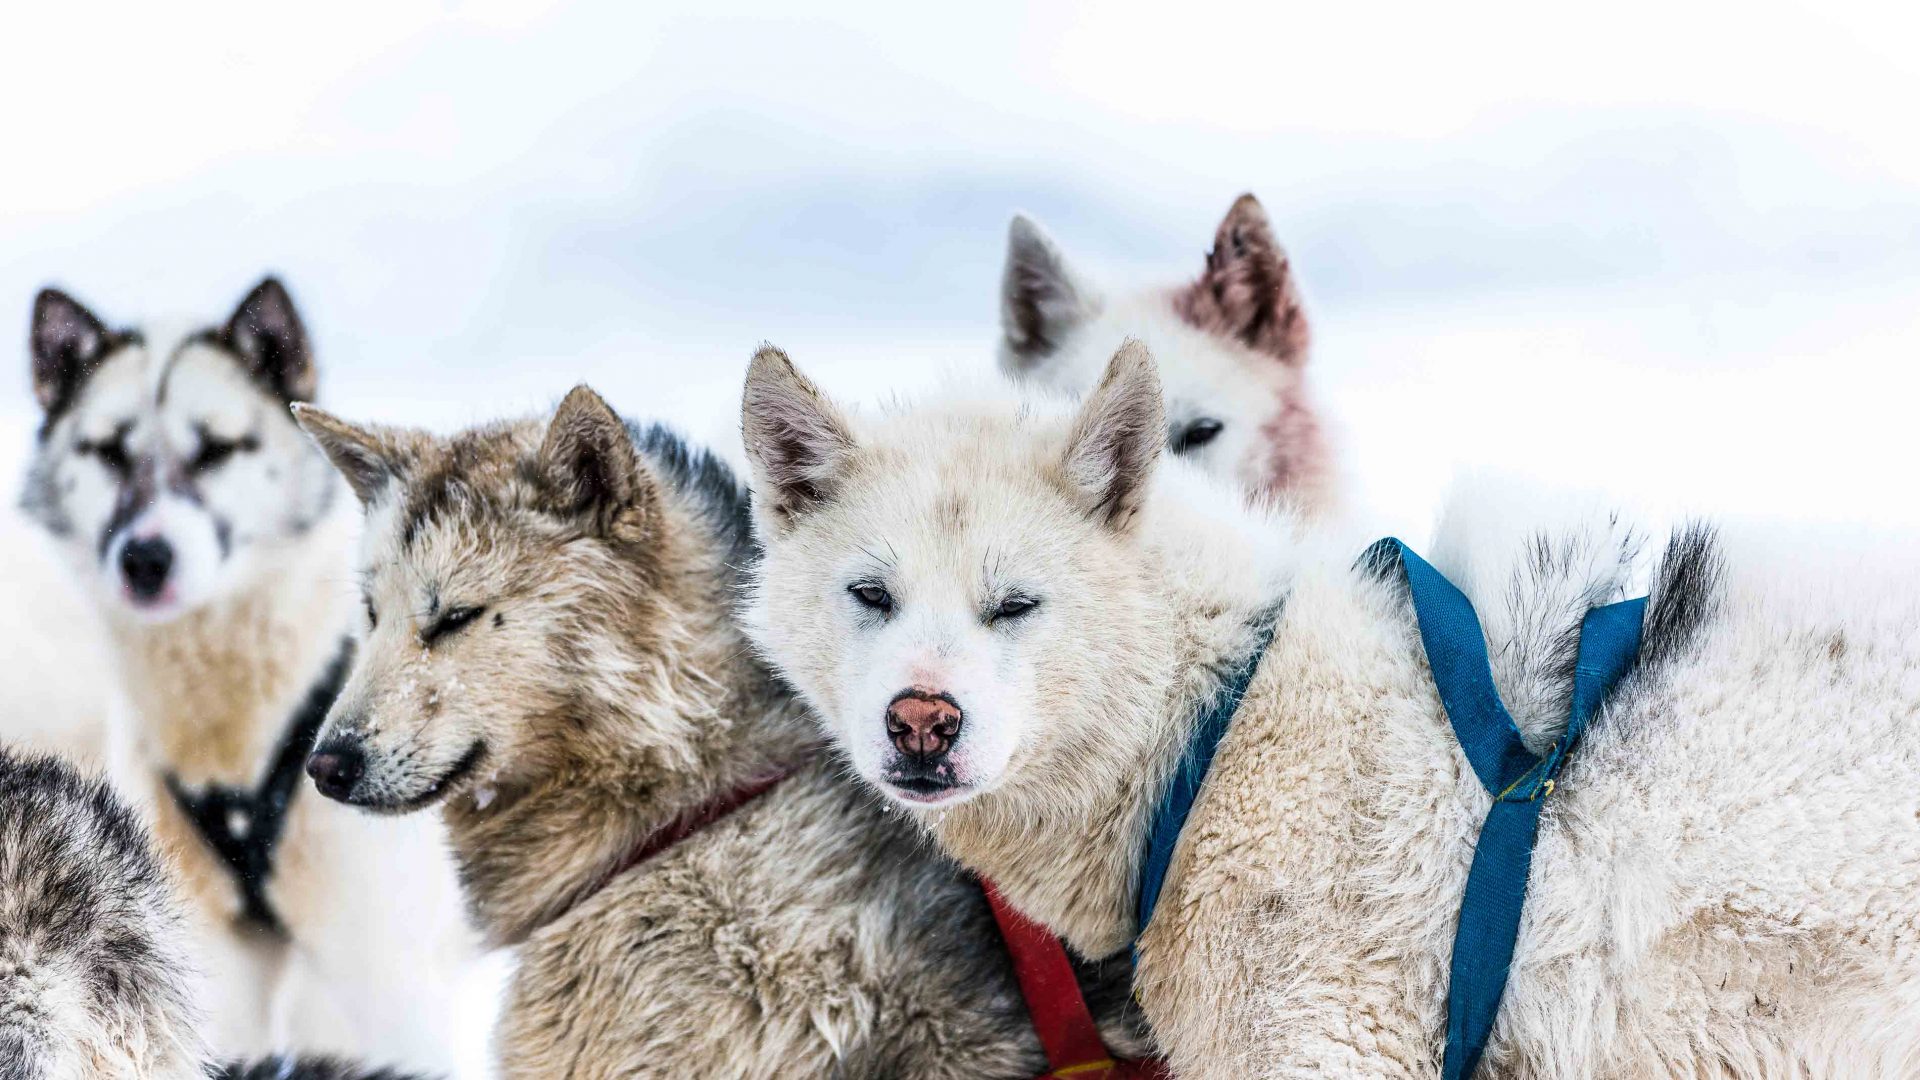 These husky-like sled dogs have been used in Greenland for over 4,000 years.